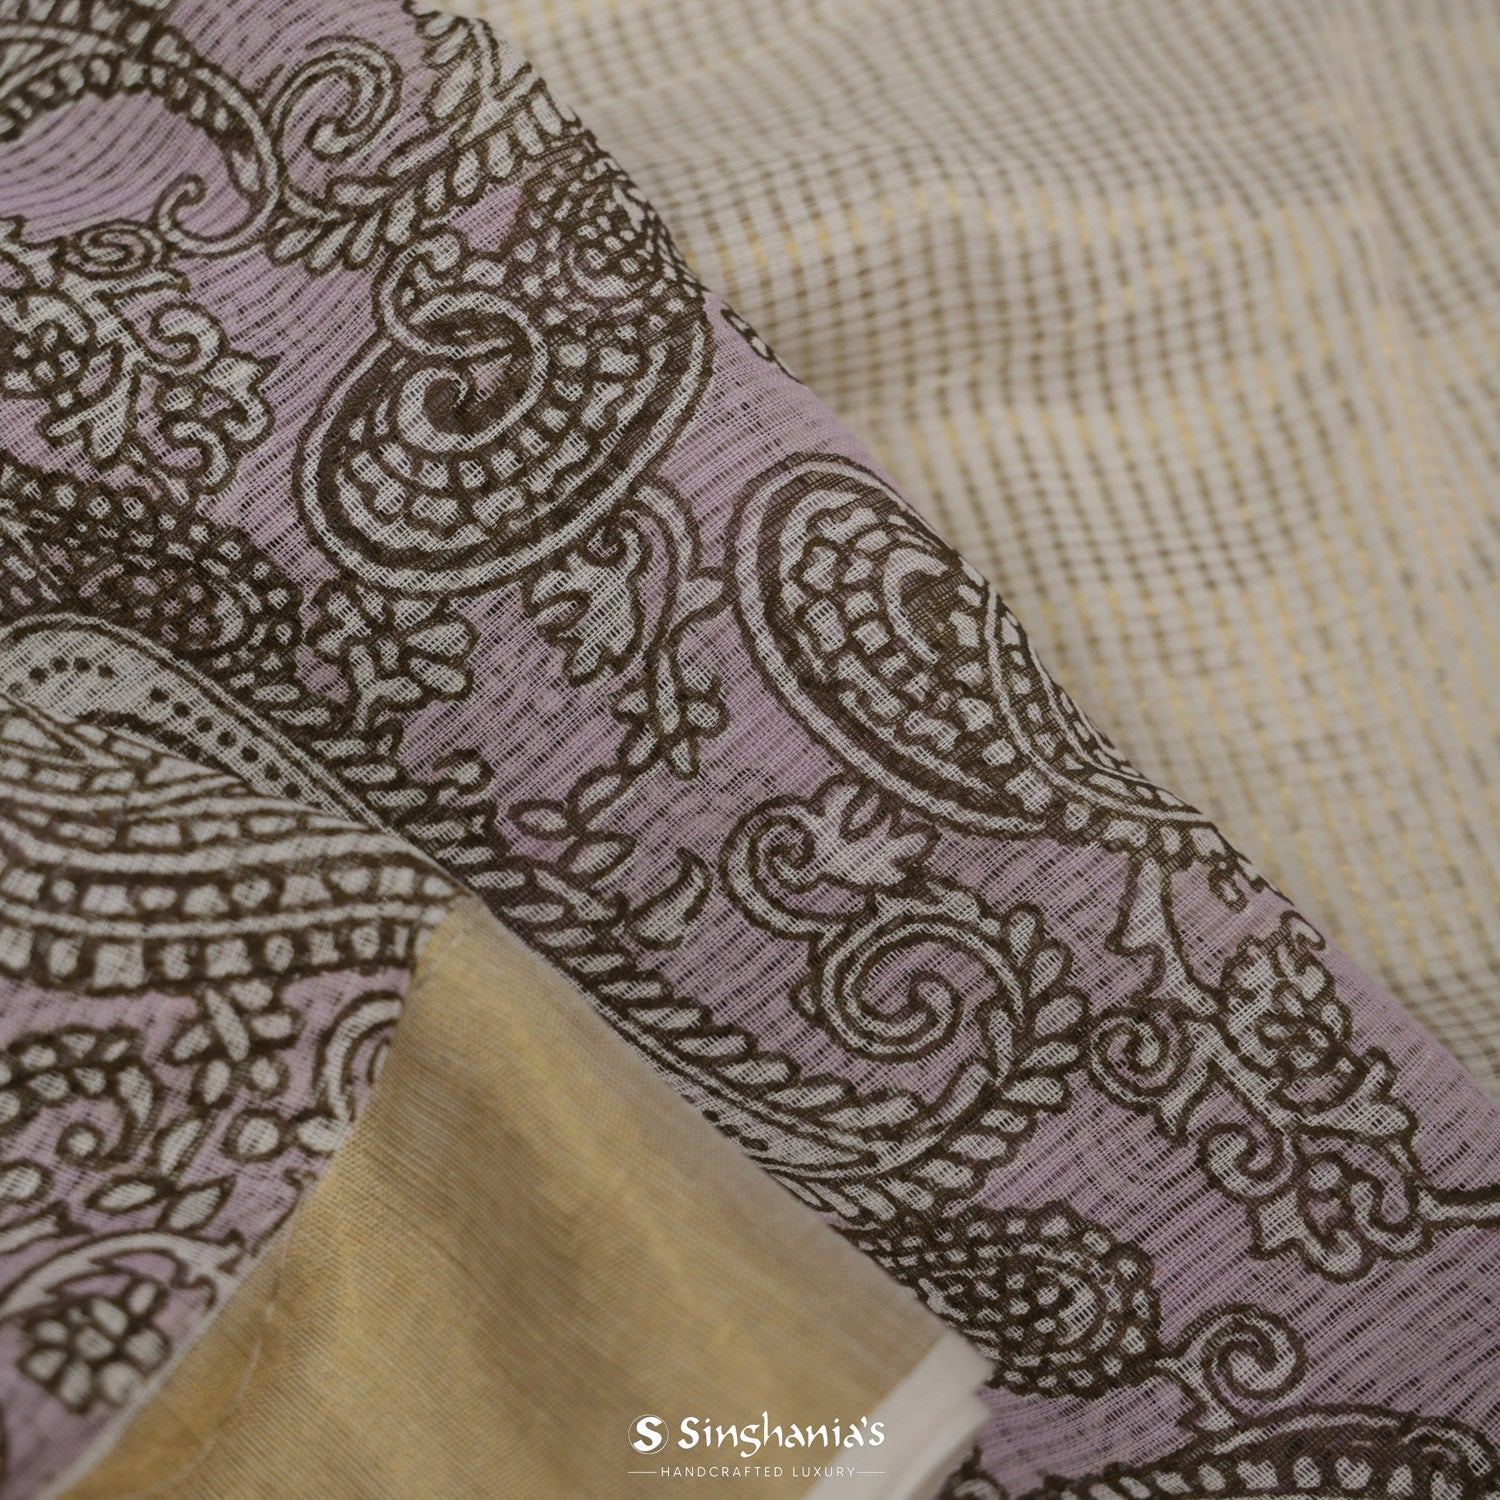 Lace Pink Printed Cotton Saree With Floral Pattern